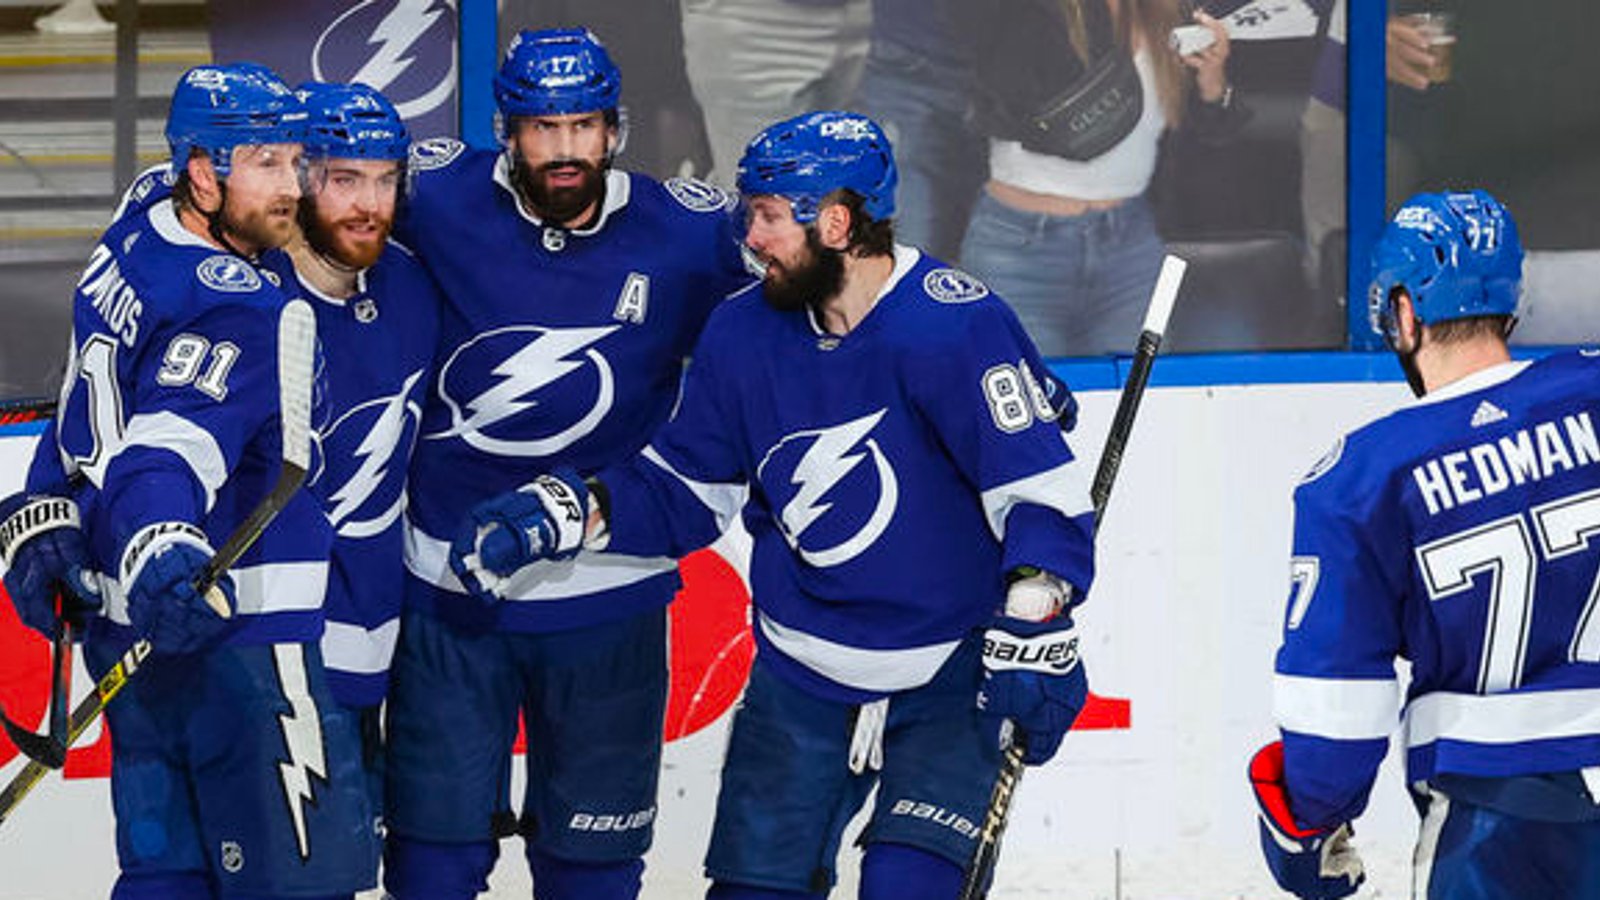 Lightning forced to make lineup changes for Game 2